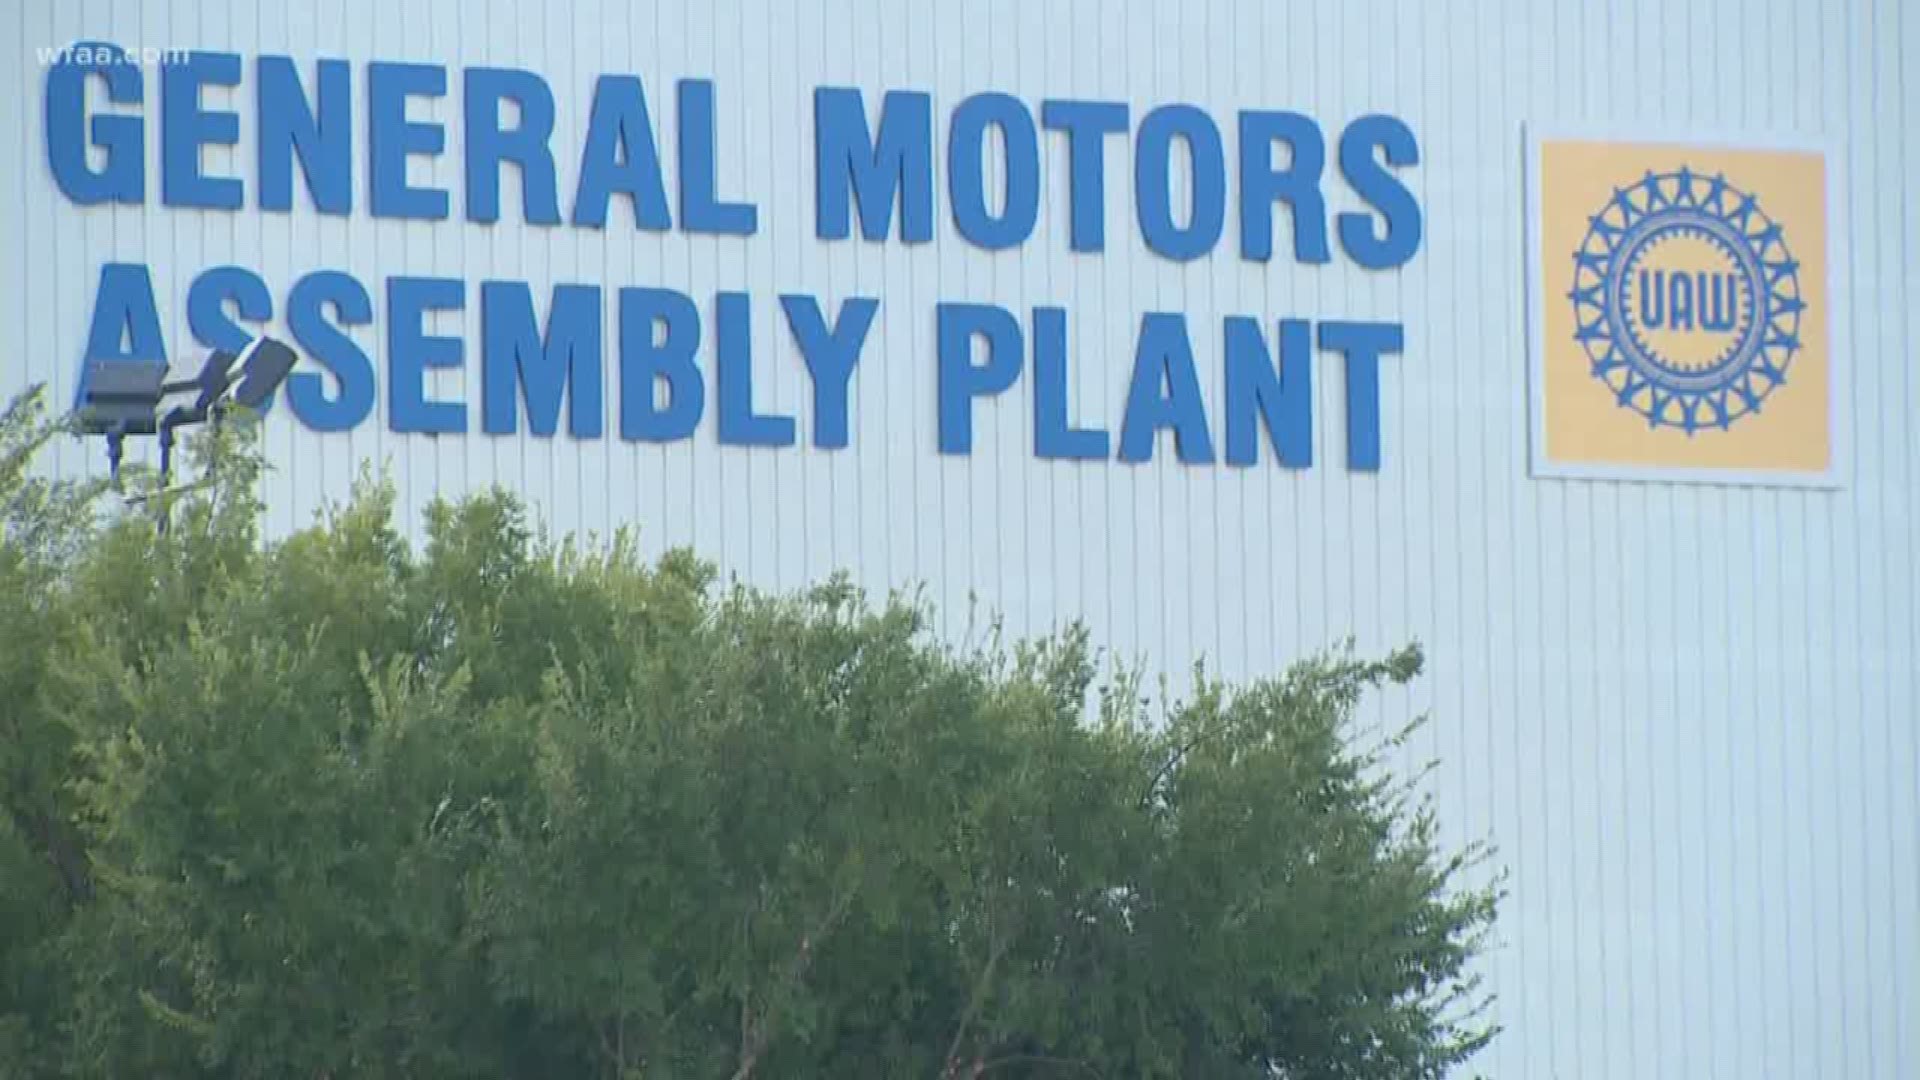 United Auto Workers says contract talks with General Motors will resume Monday morning, but the threat of a strike remains.

Union spokesman Brian Rothenberg says the negotiations are slated to begin at 10 a.m. Monday. GM's 49,200 UAW members still plan to go on strike nationwide at midnight. More: https://on.wfaa.com/2I8ZHjk